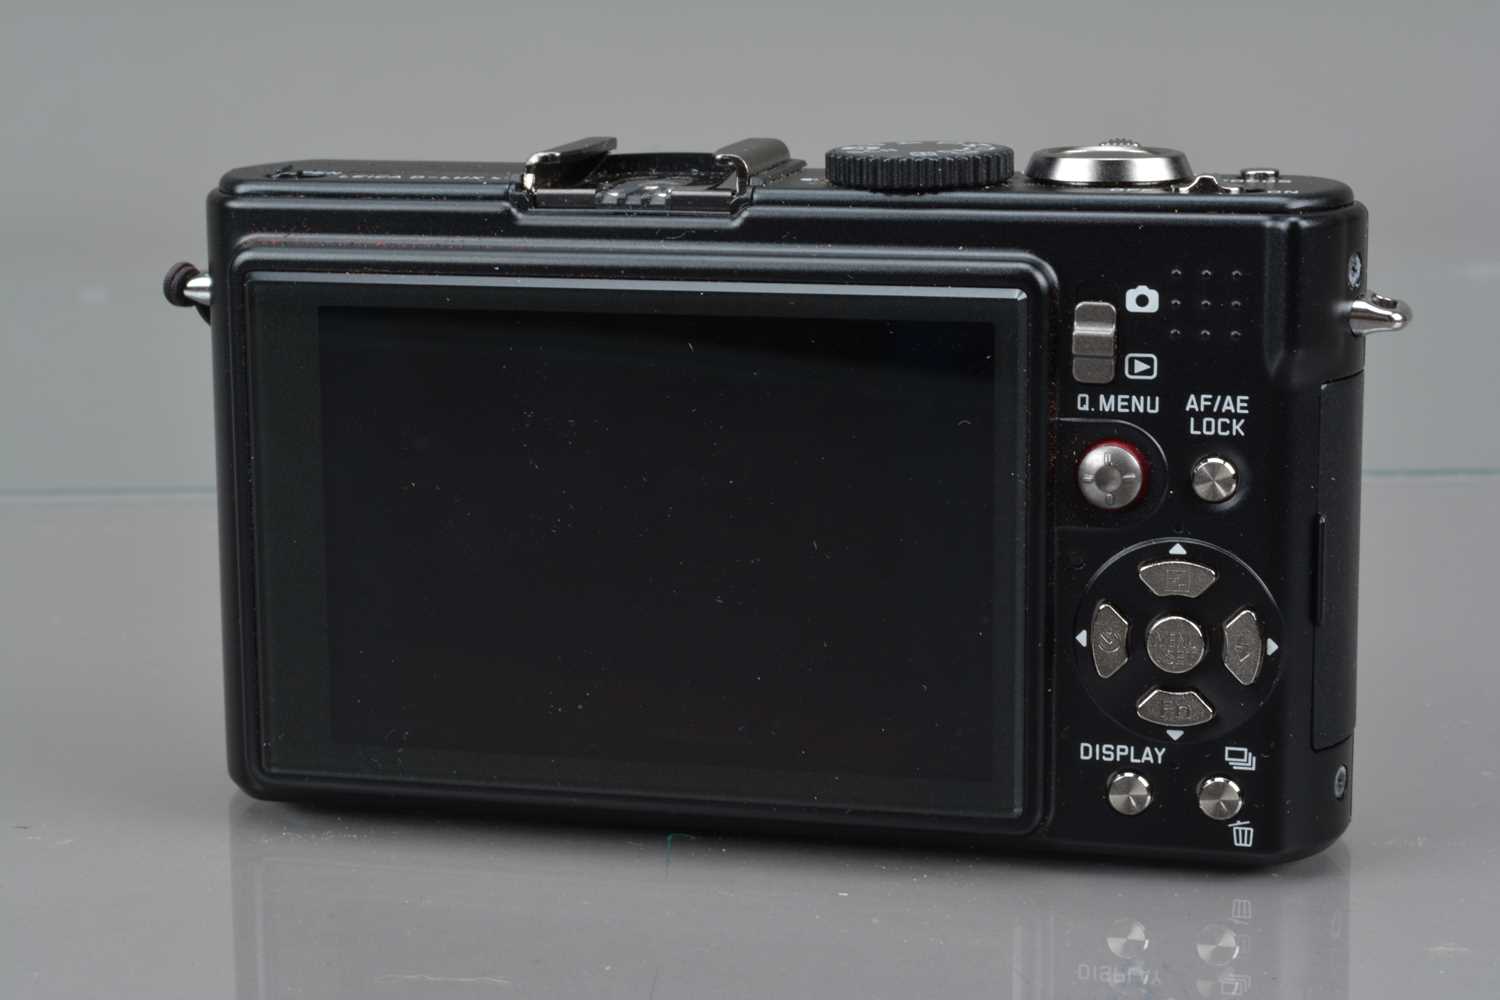 A Leica D-LUX 4 Digital Camera, - Image 2 of 3